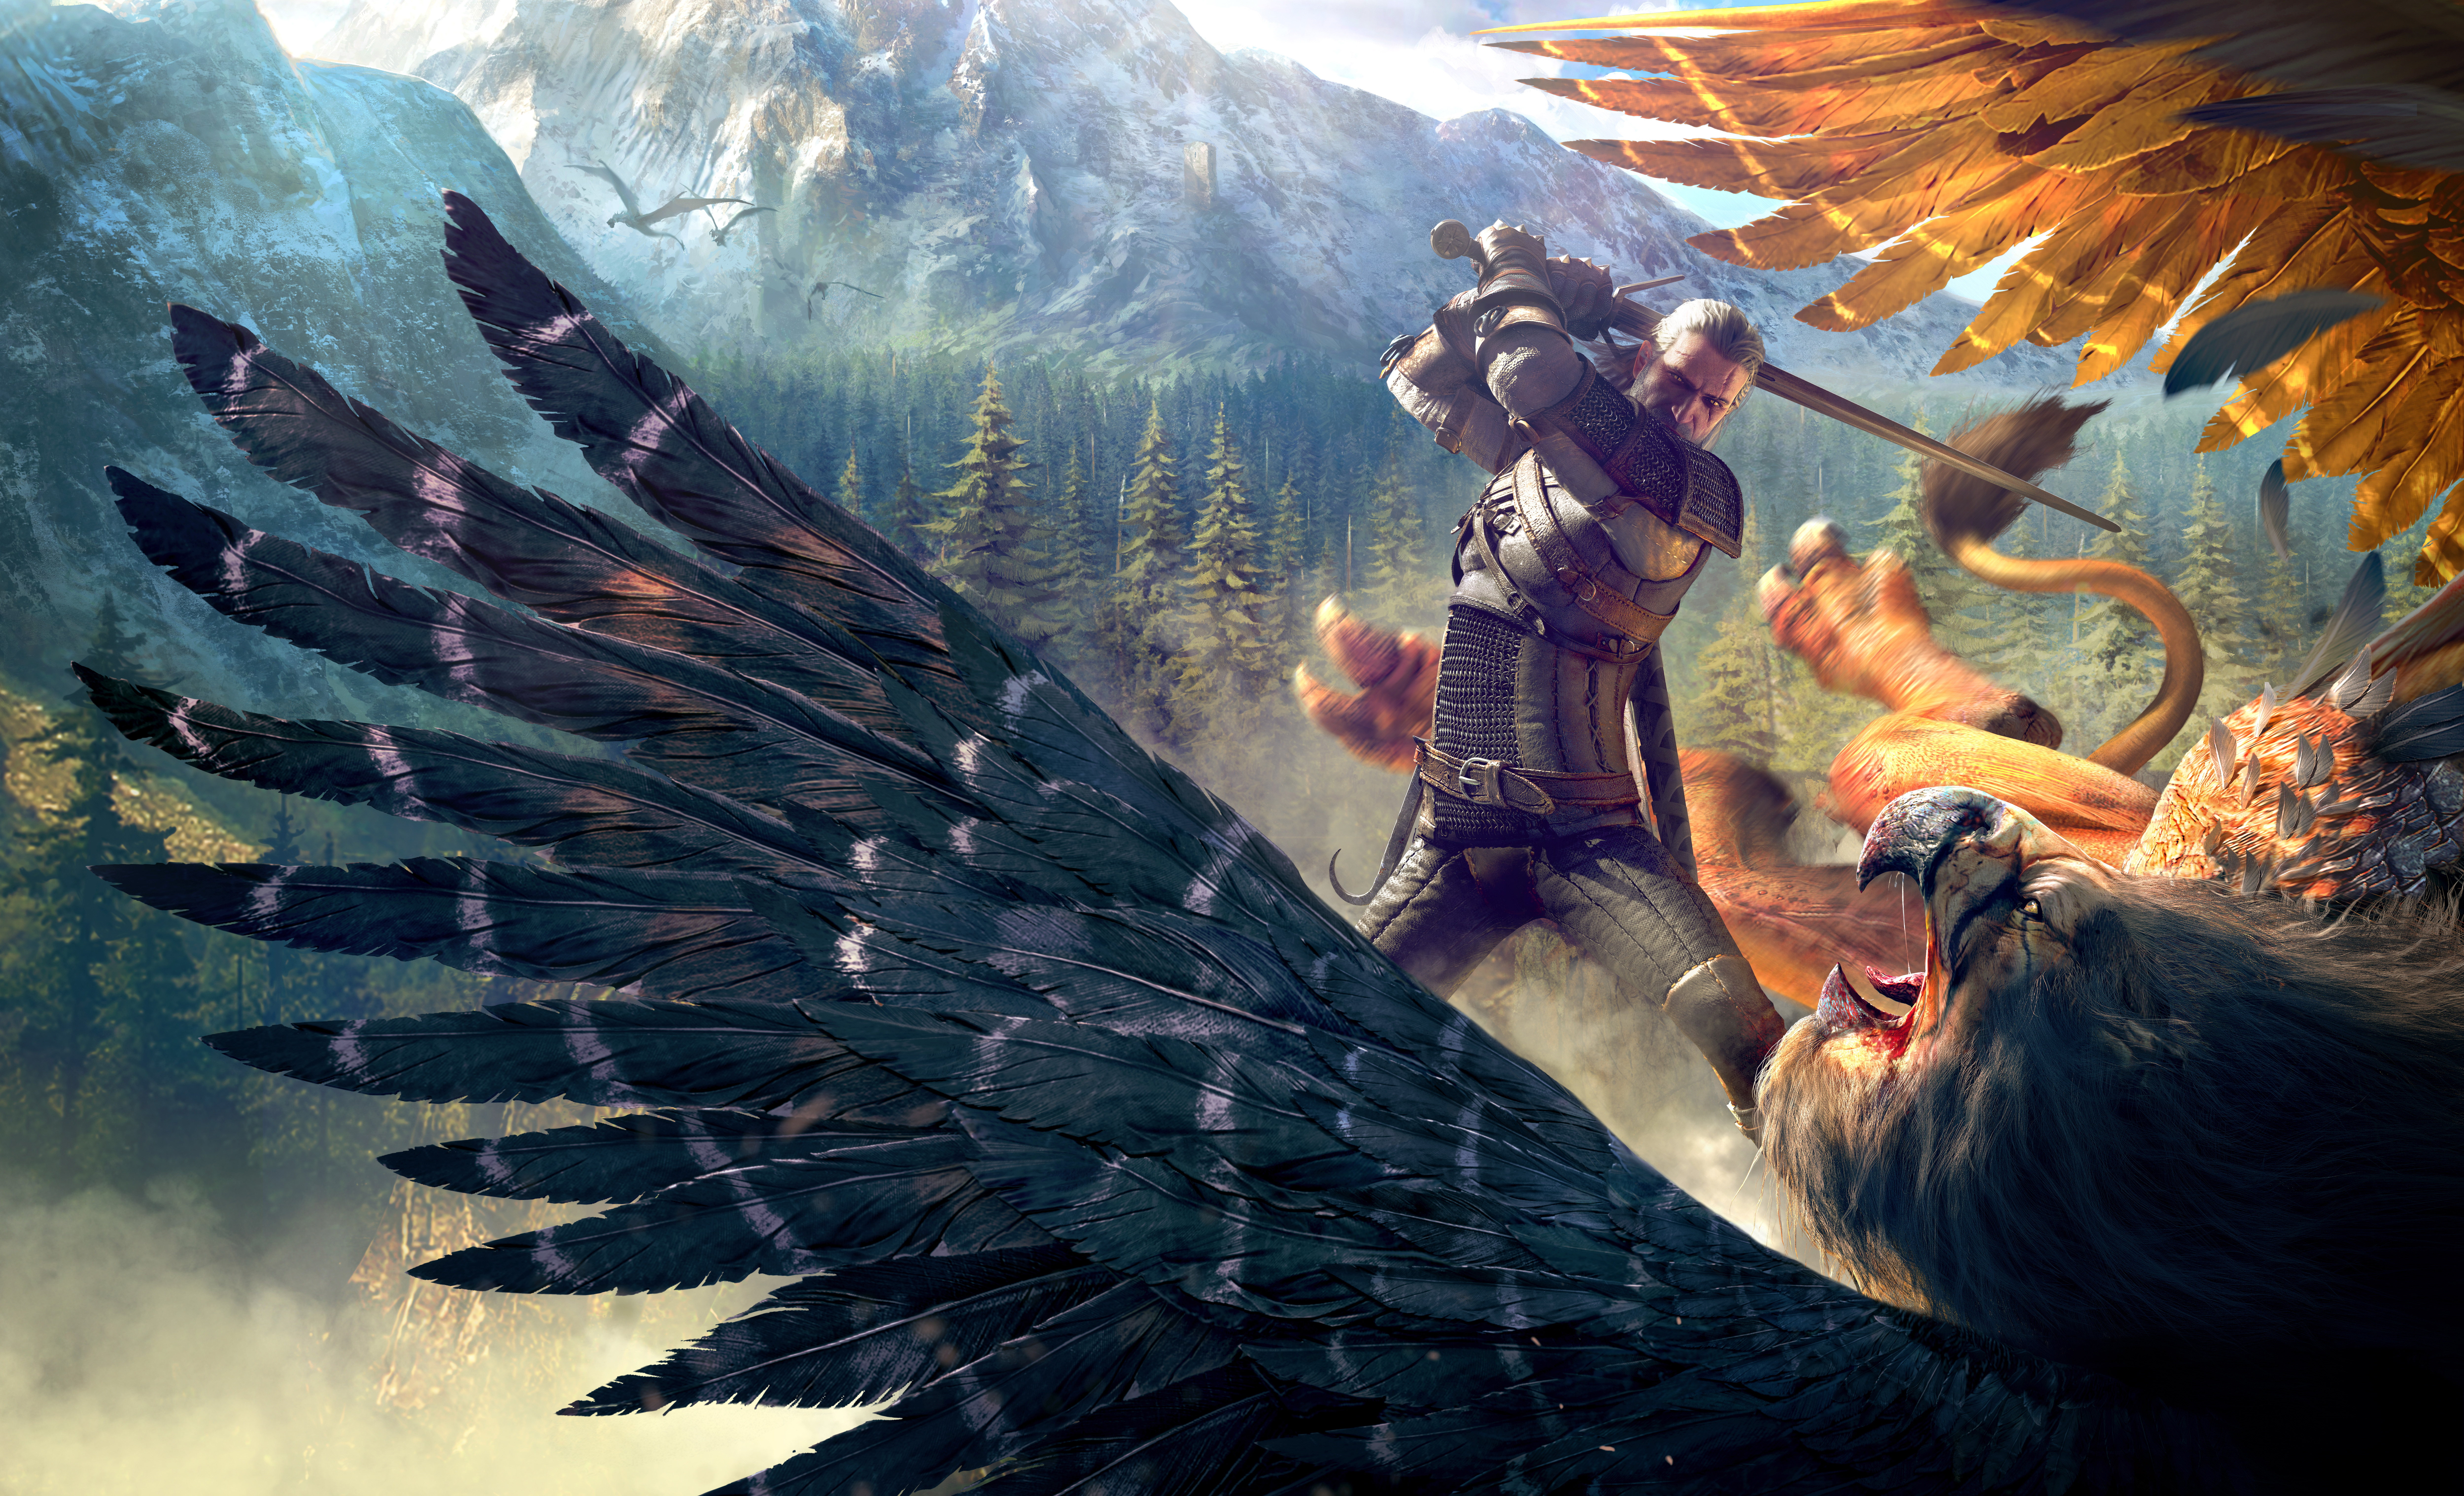 the witcher 3: wild hunt, geralt of rivia, the witcher, video game images